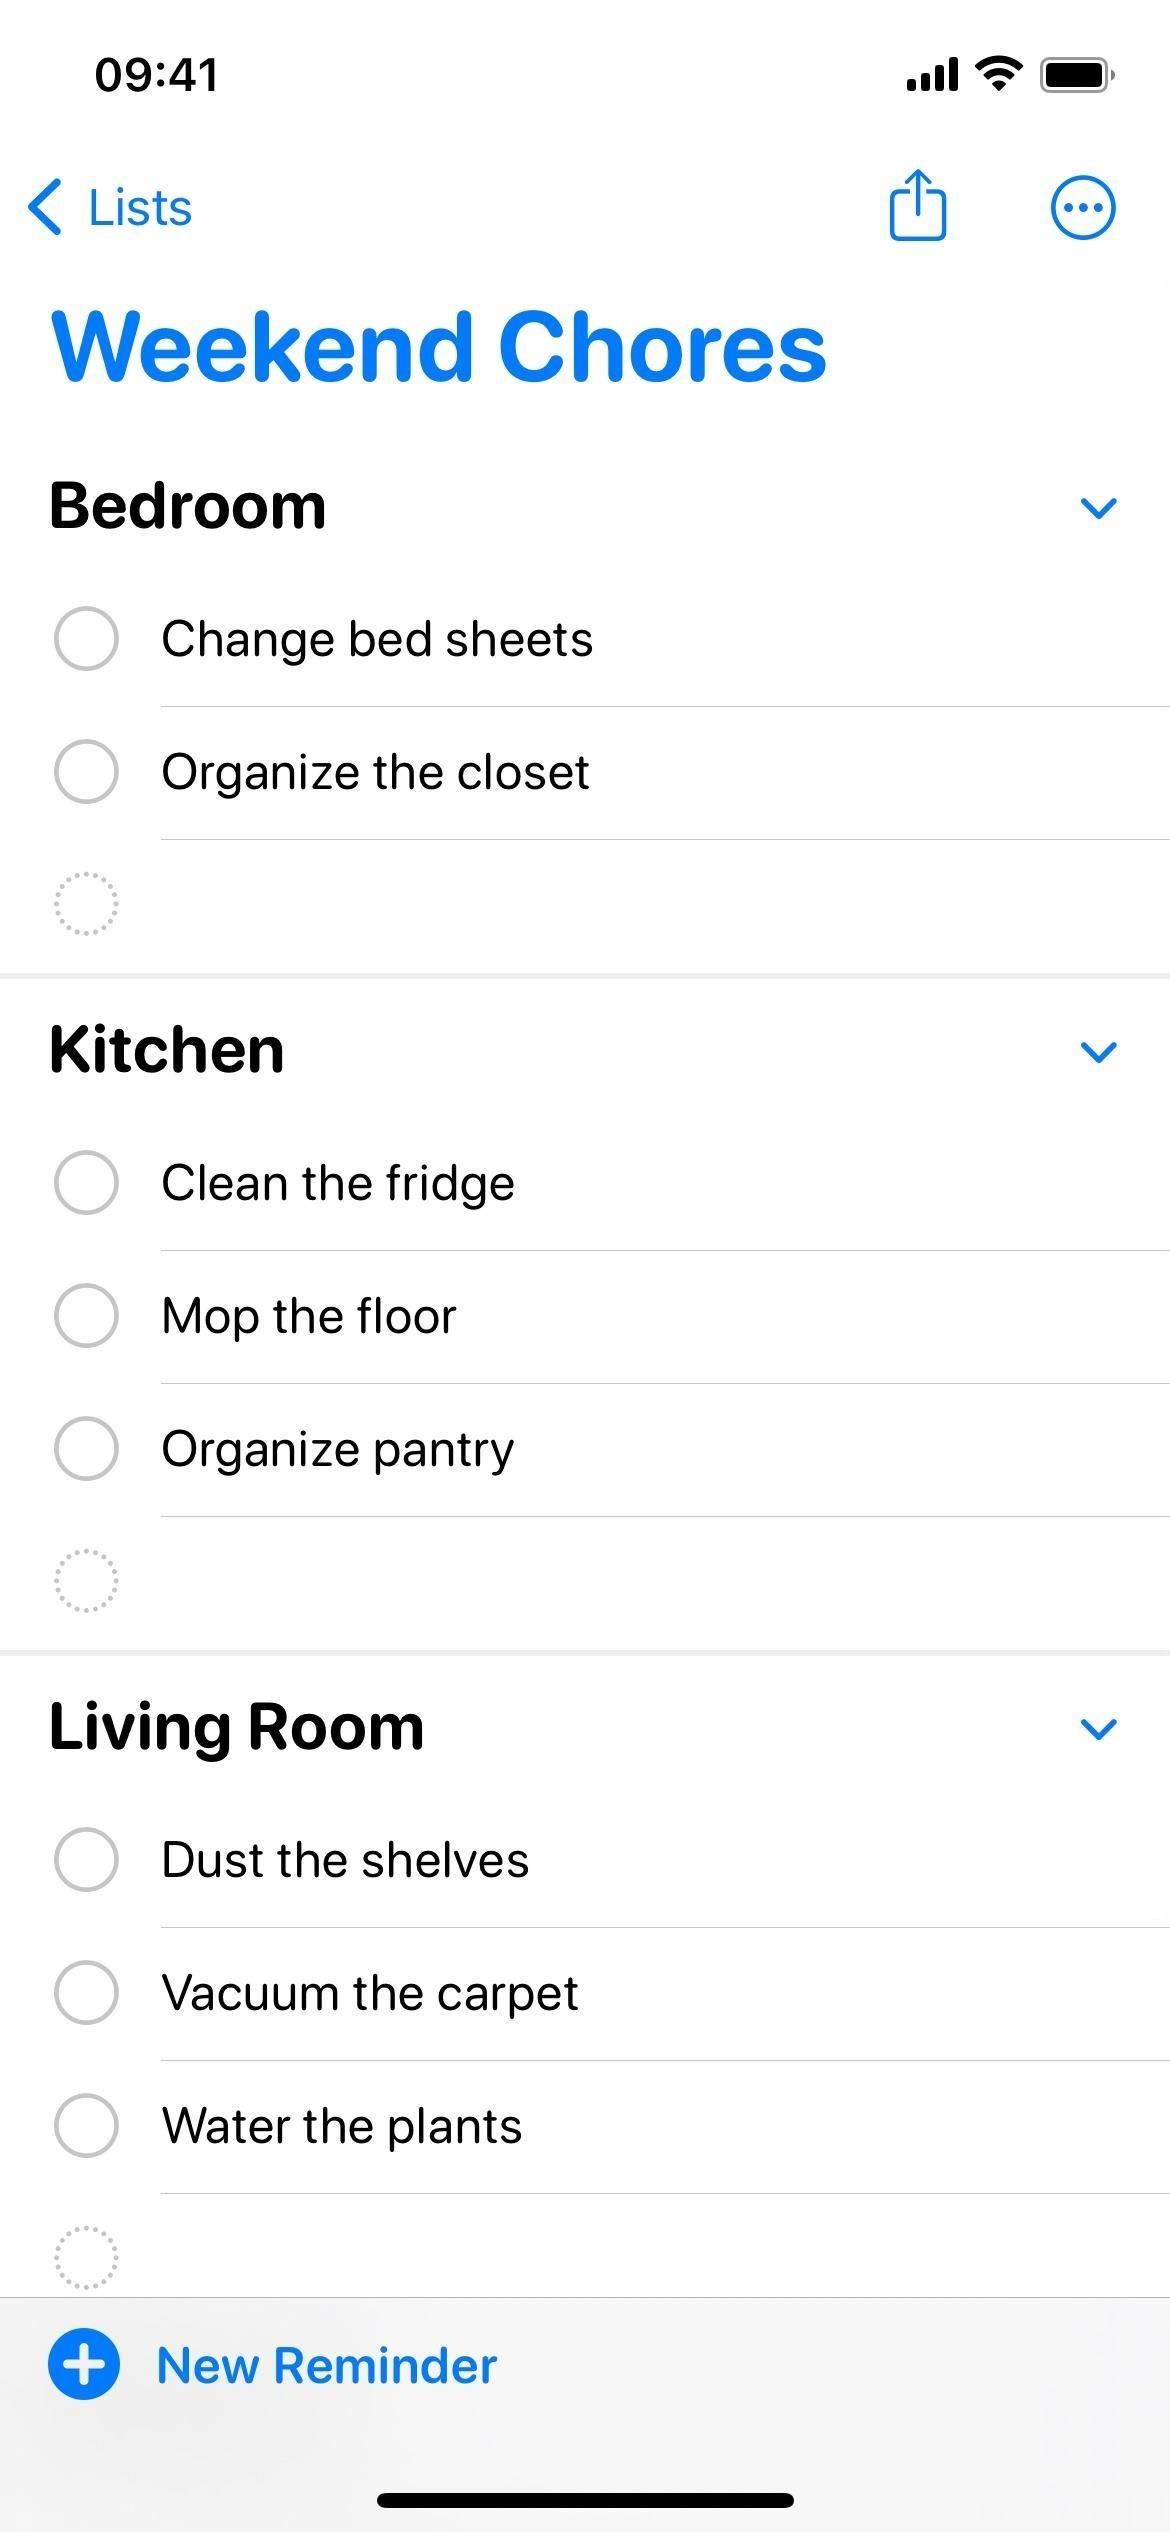 Organize Reminders by Sections and Columns on Your iPhone for More Efficient To-Do Lists